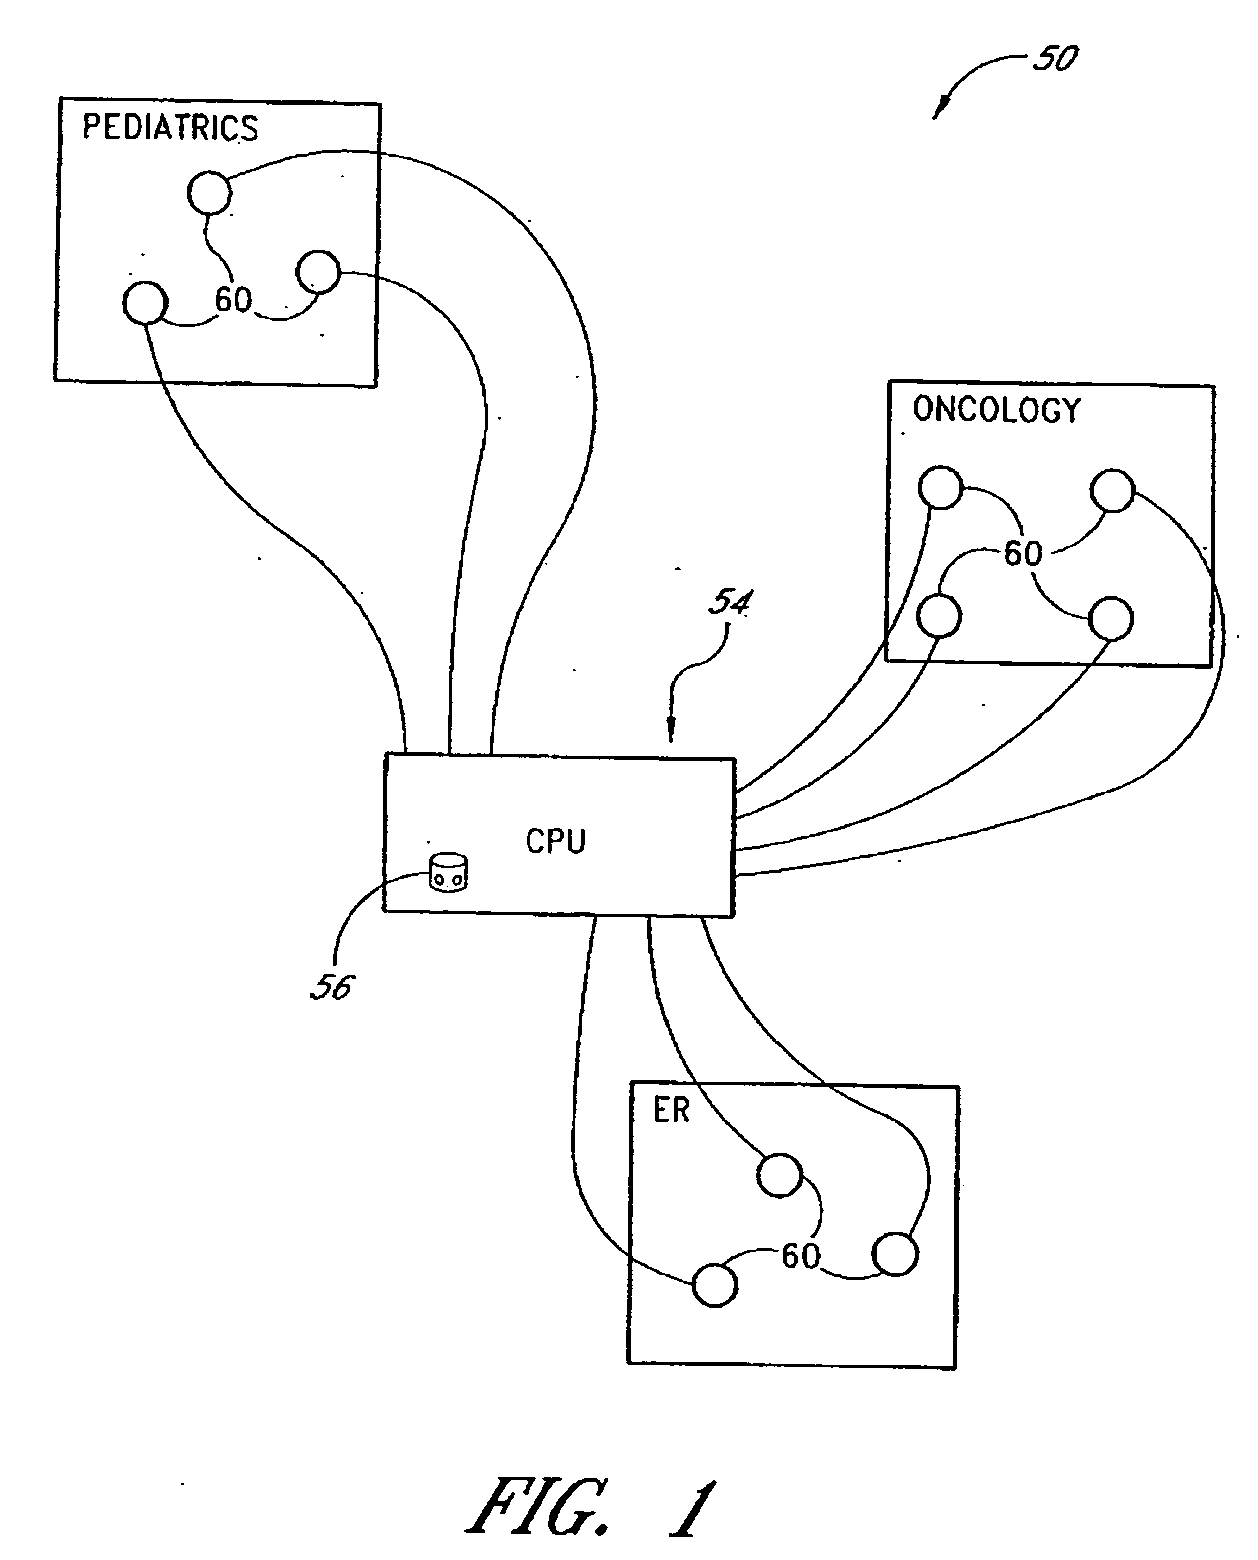 Method for sorting discarded and spent pharmaceutical items